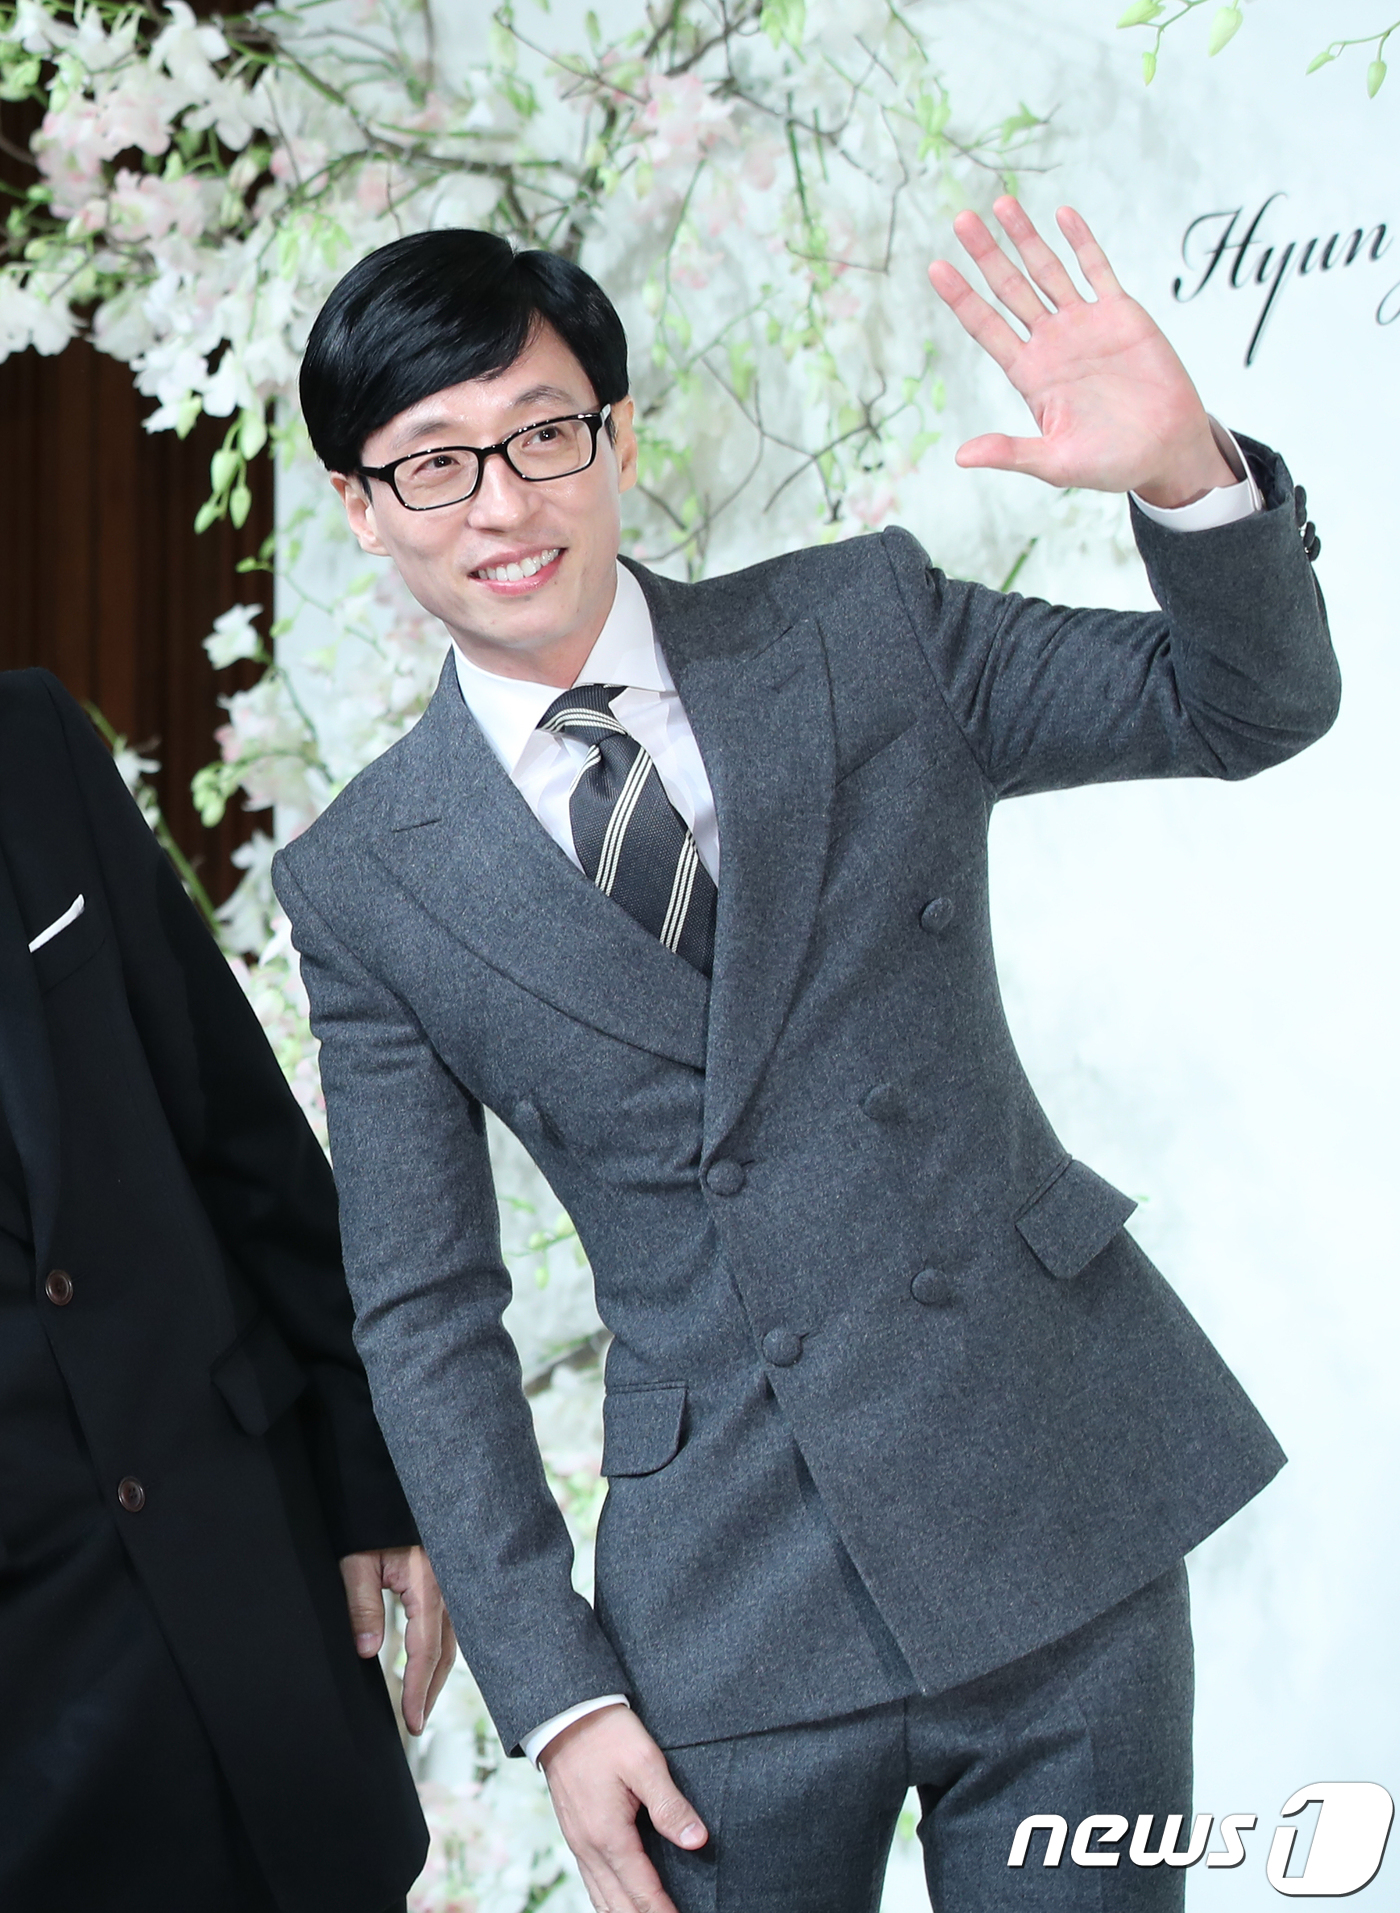 Seoul) = Yoo Jae-Suk said he heard Date of the City with a tight chat.MBC FM4U Its a date Ji Suk-jin at 2 oclock (hereinafter referred to as Doude), which was broadcast on the afternoon of the 18th, featured national MC Yoo Jae-Suk and showed off his dedication.On this day, Yoo Jae-Suk received a lot of attention from listeners just by appearing.He continued to talk actively from the story of child care to Running Man and Infinite Challenge regardless of genre.On the air, Yoo Jae-Suk expressed his affection for his second daughter, who said, I thought I wouldnt cry when my second was born, but I was wobbly; there is an atmosphere to be expounded.The childs name is Yuna Eun. My wife, Na Kyung, is from her name. My daughter is now 2 years old.Today, I rolled three wheels and everyone was surprised. I also received a question from the listener about whether I usually participate in childcare well. Even if I try to work hard, I can only help in some ways.So I try to do the best I can on Sundays and holidays, he said frankly.Ji Suk-jin and Yoo Jae-Suk also talked about Running Man.Yoo Jae-Suk usually filmed Running Man and told Ji Suk-jin that he was playing a lot of jokes and made him laugh at the listeners.He also said, Even after 50, chases are possible; as long as Running Man does, it will make (physical) possible.There was also a story about the Infinite Challenge.Yoo Jae-Suk said, I met the viewers for a while on March 31st, and the members want to do Infinite Challenge. Thankfully, many people want to wait with One and wait for us, but this is not our choice because there is a production team and a broadcasting station.I want to shout Infinite Challenge, but it is not at will. Yoo Jae-Suk also said, I like friends who react to panic when I play games. He said Jo Se-ho, Lee Kwang-soo and Nam Chang-hee as his favorite sisters.He said that he knew that he would be good someday because he had a sense of Lee Yong-jin.Yoo Jae-Suk filled his hour with a constant chat, after which he played his life song and finished the broadcast.On the other hand, 2 oclock date Ji Suk-jin is broadcast every day from 2 pm to 4 pm.